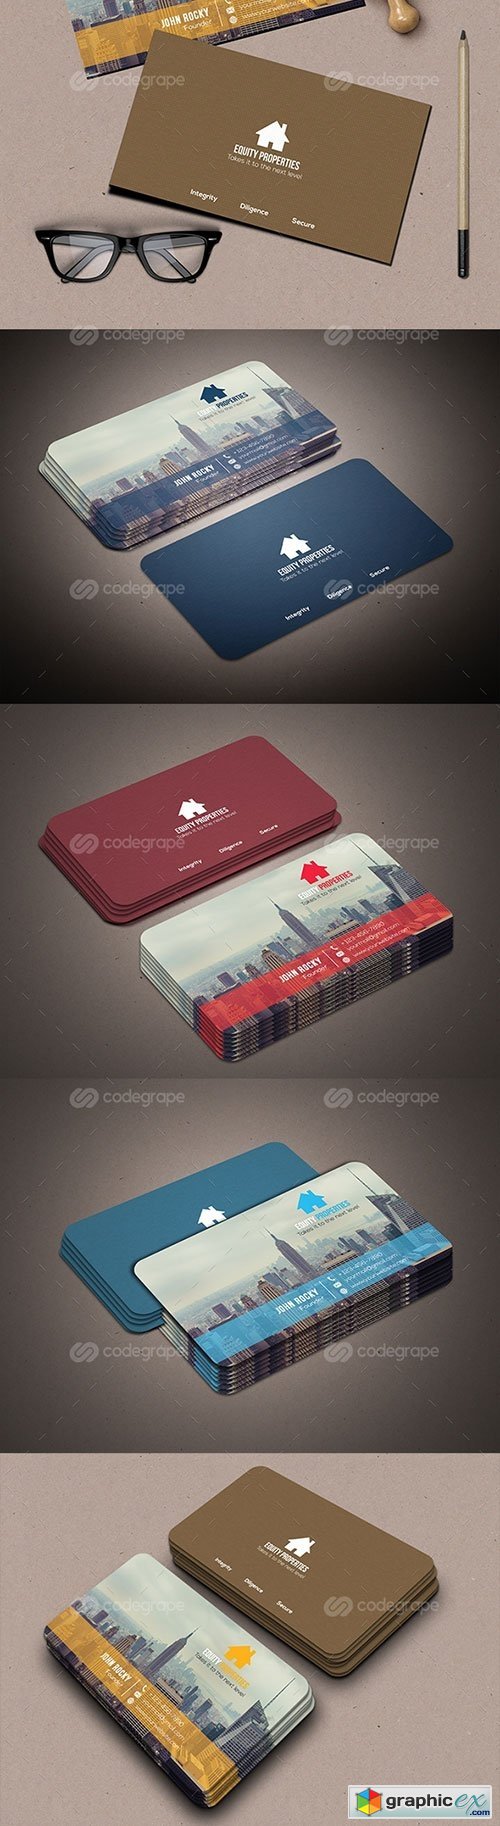 Real Estate Business Card 10880